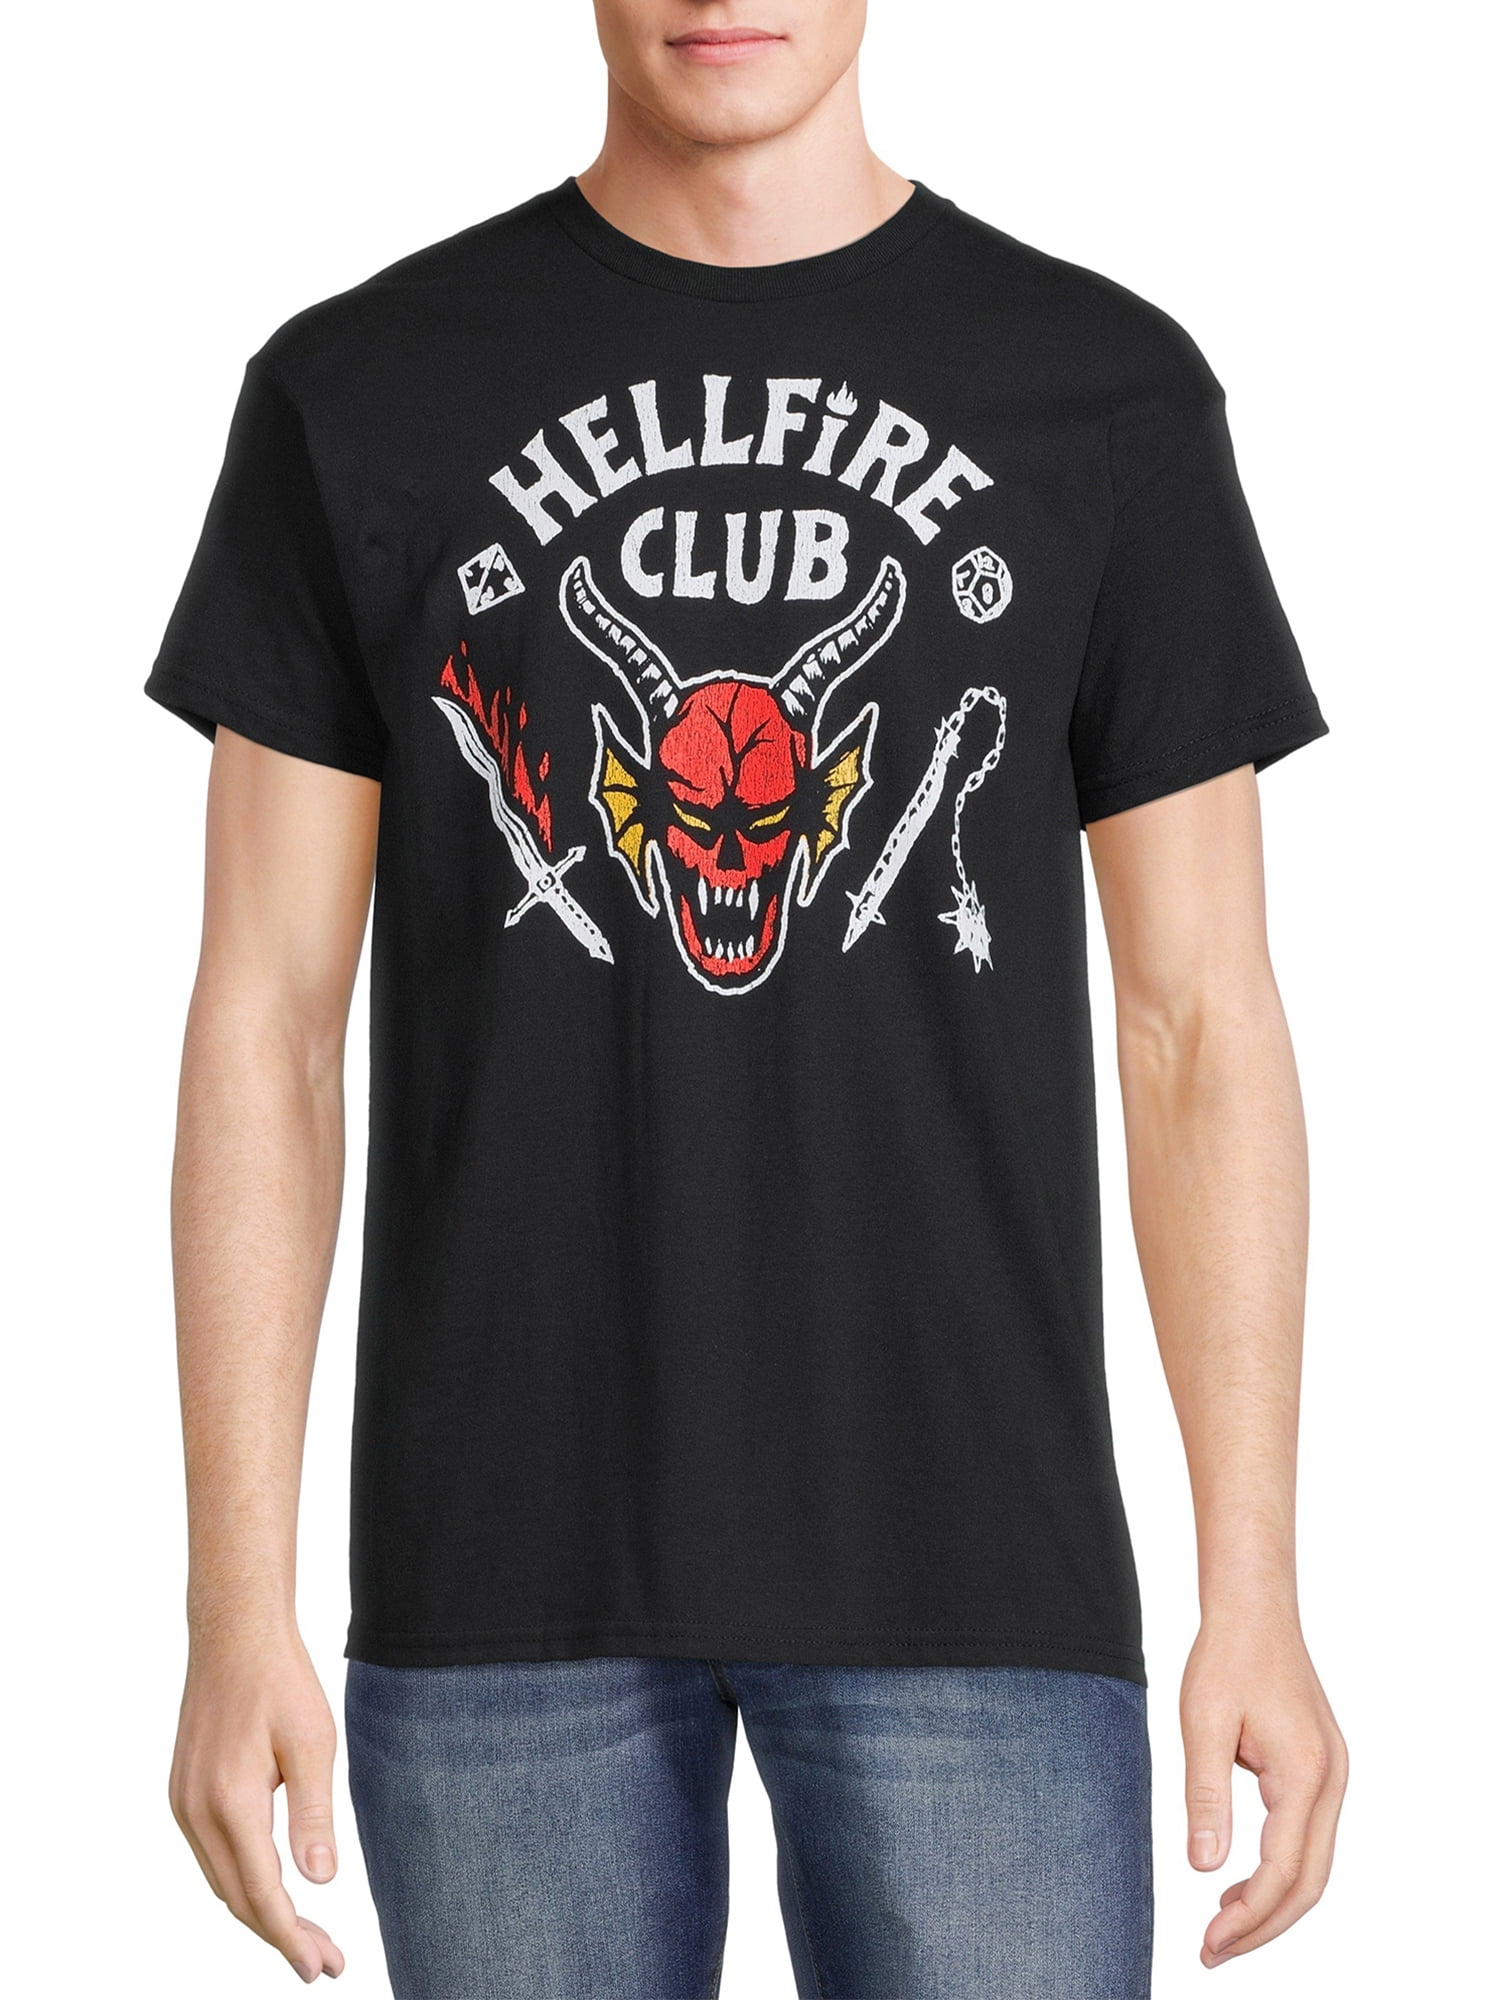 Stranger Things Men's Hellfire Club Graphic Tee with Short Sleeves